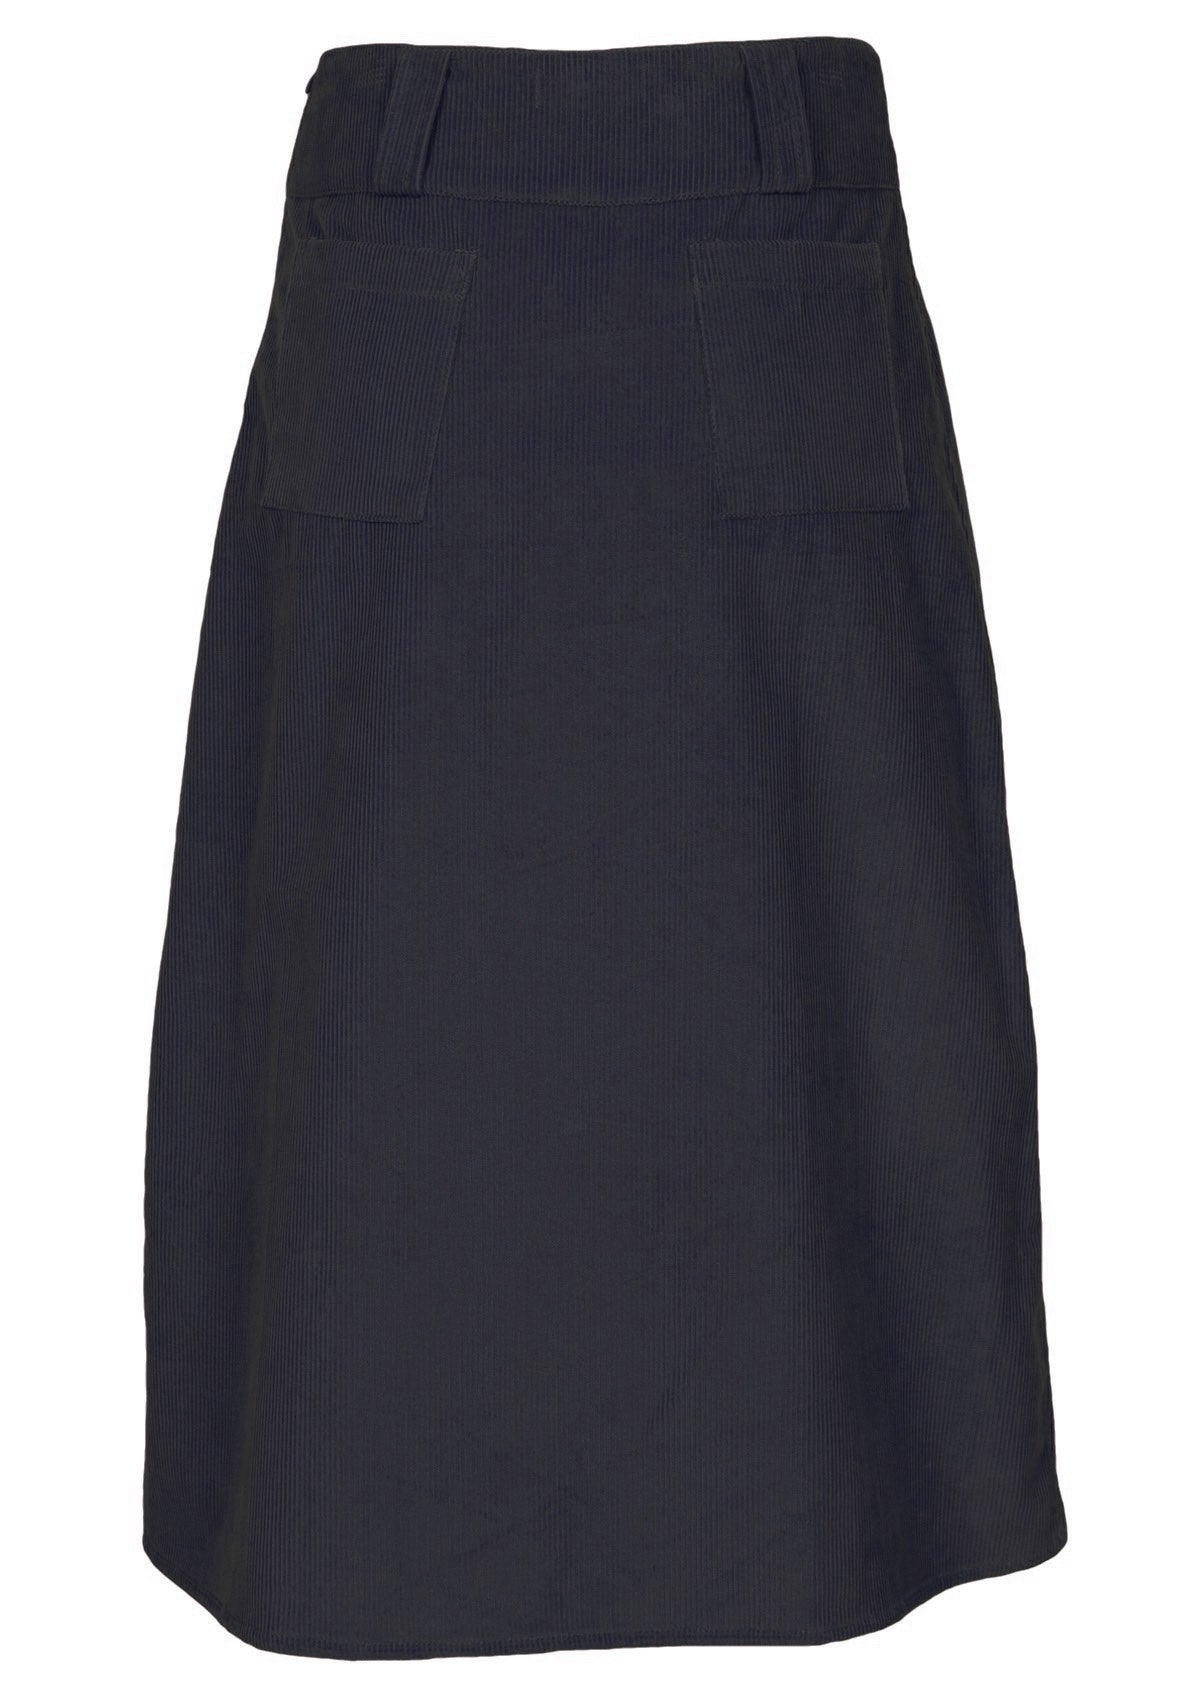 Corduroy skirt in a greyish blue colour featuring back pockets. 